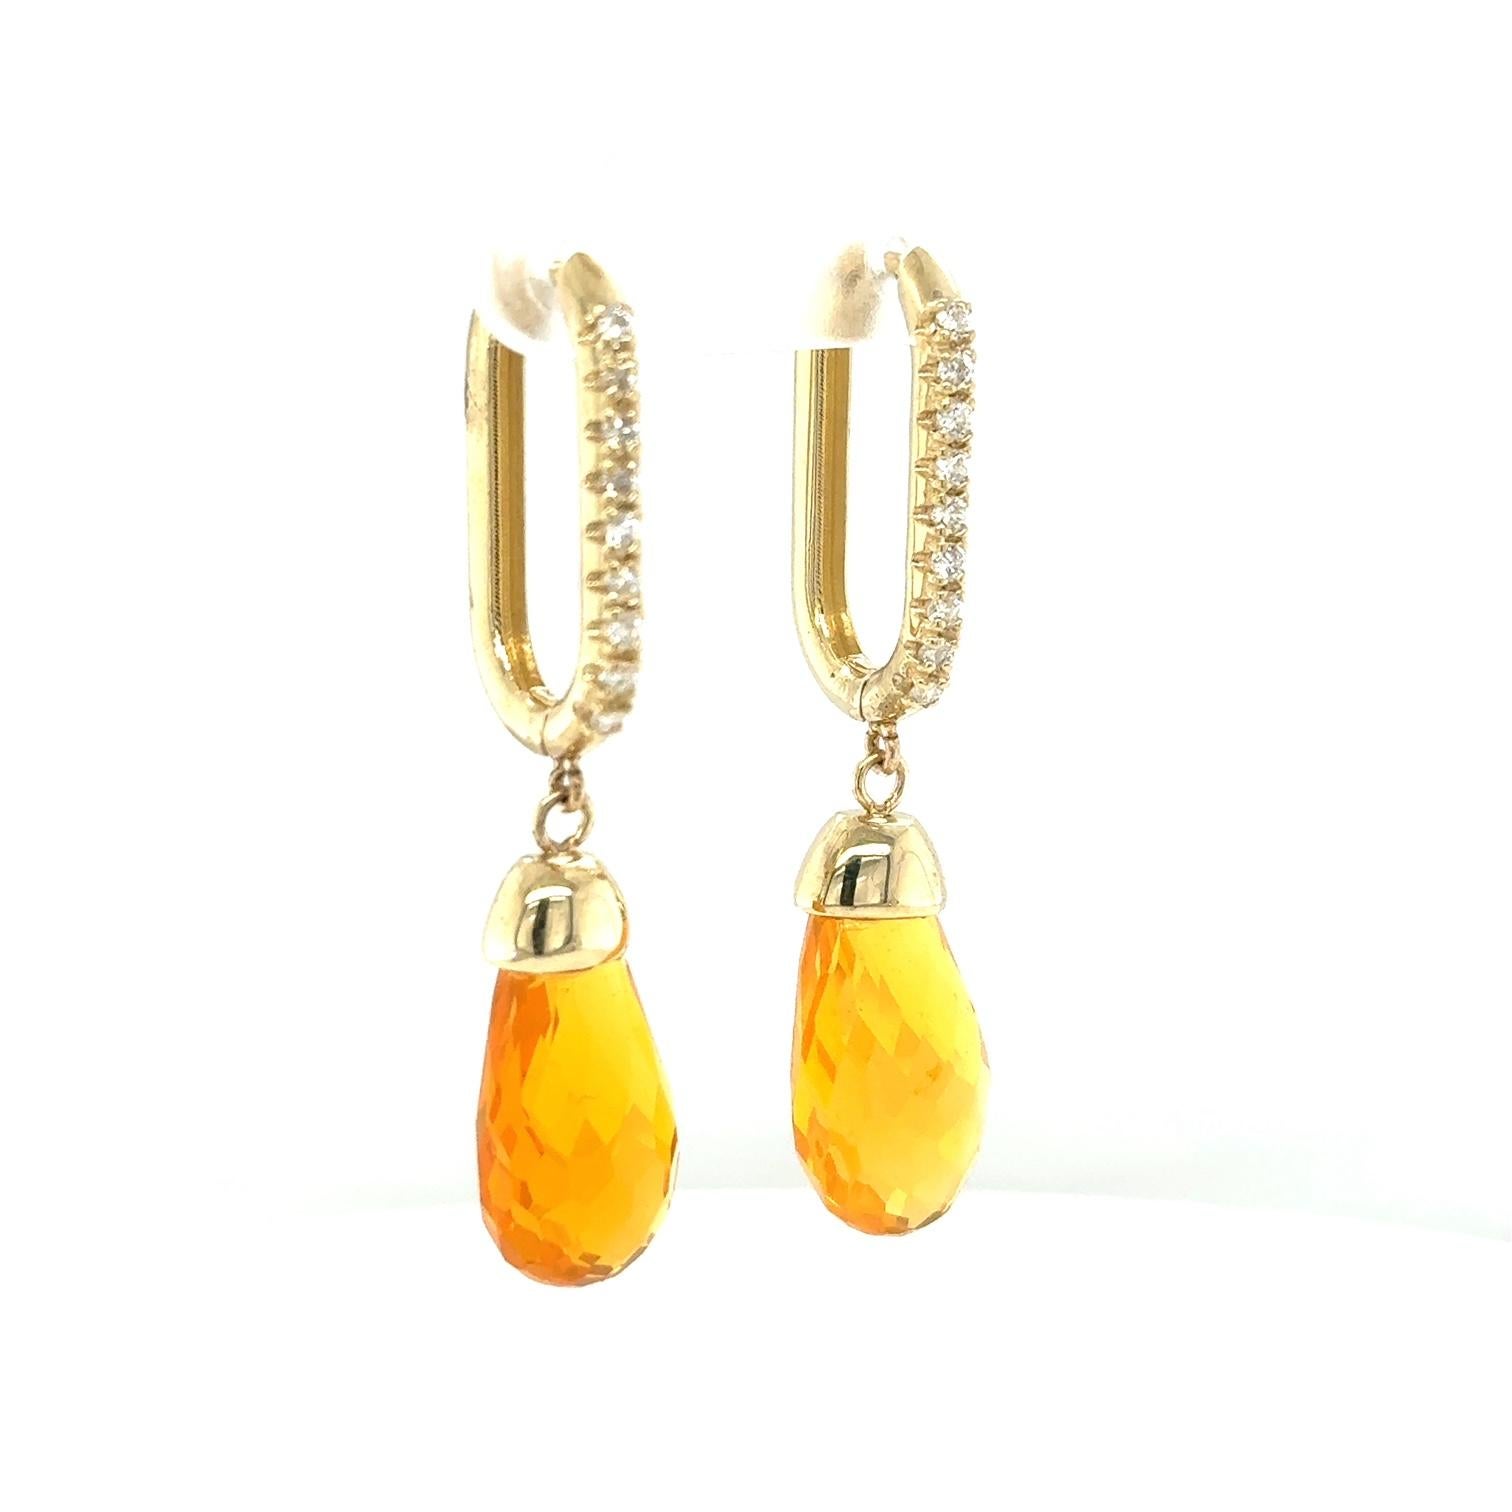 12.84 Carat Fire Opal Diamond Yellow Gold Drop Earrings

Item Specs:

2 Faceted Briolette Fire Opal stones weighing approximately 12.50 Carats
(Measurements of Fire Opal Faceted Briolette 15mm x 10mm) 
18 Round Cut Natural Diamonds weighing 0.34